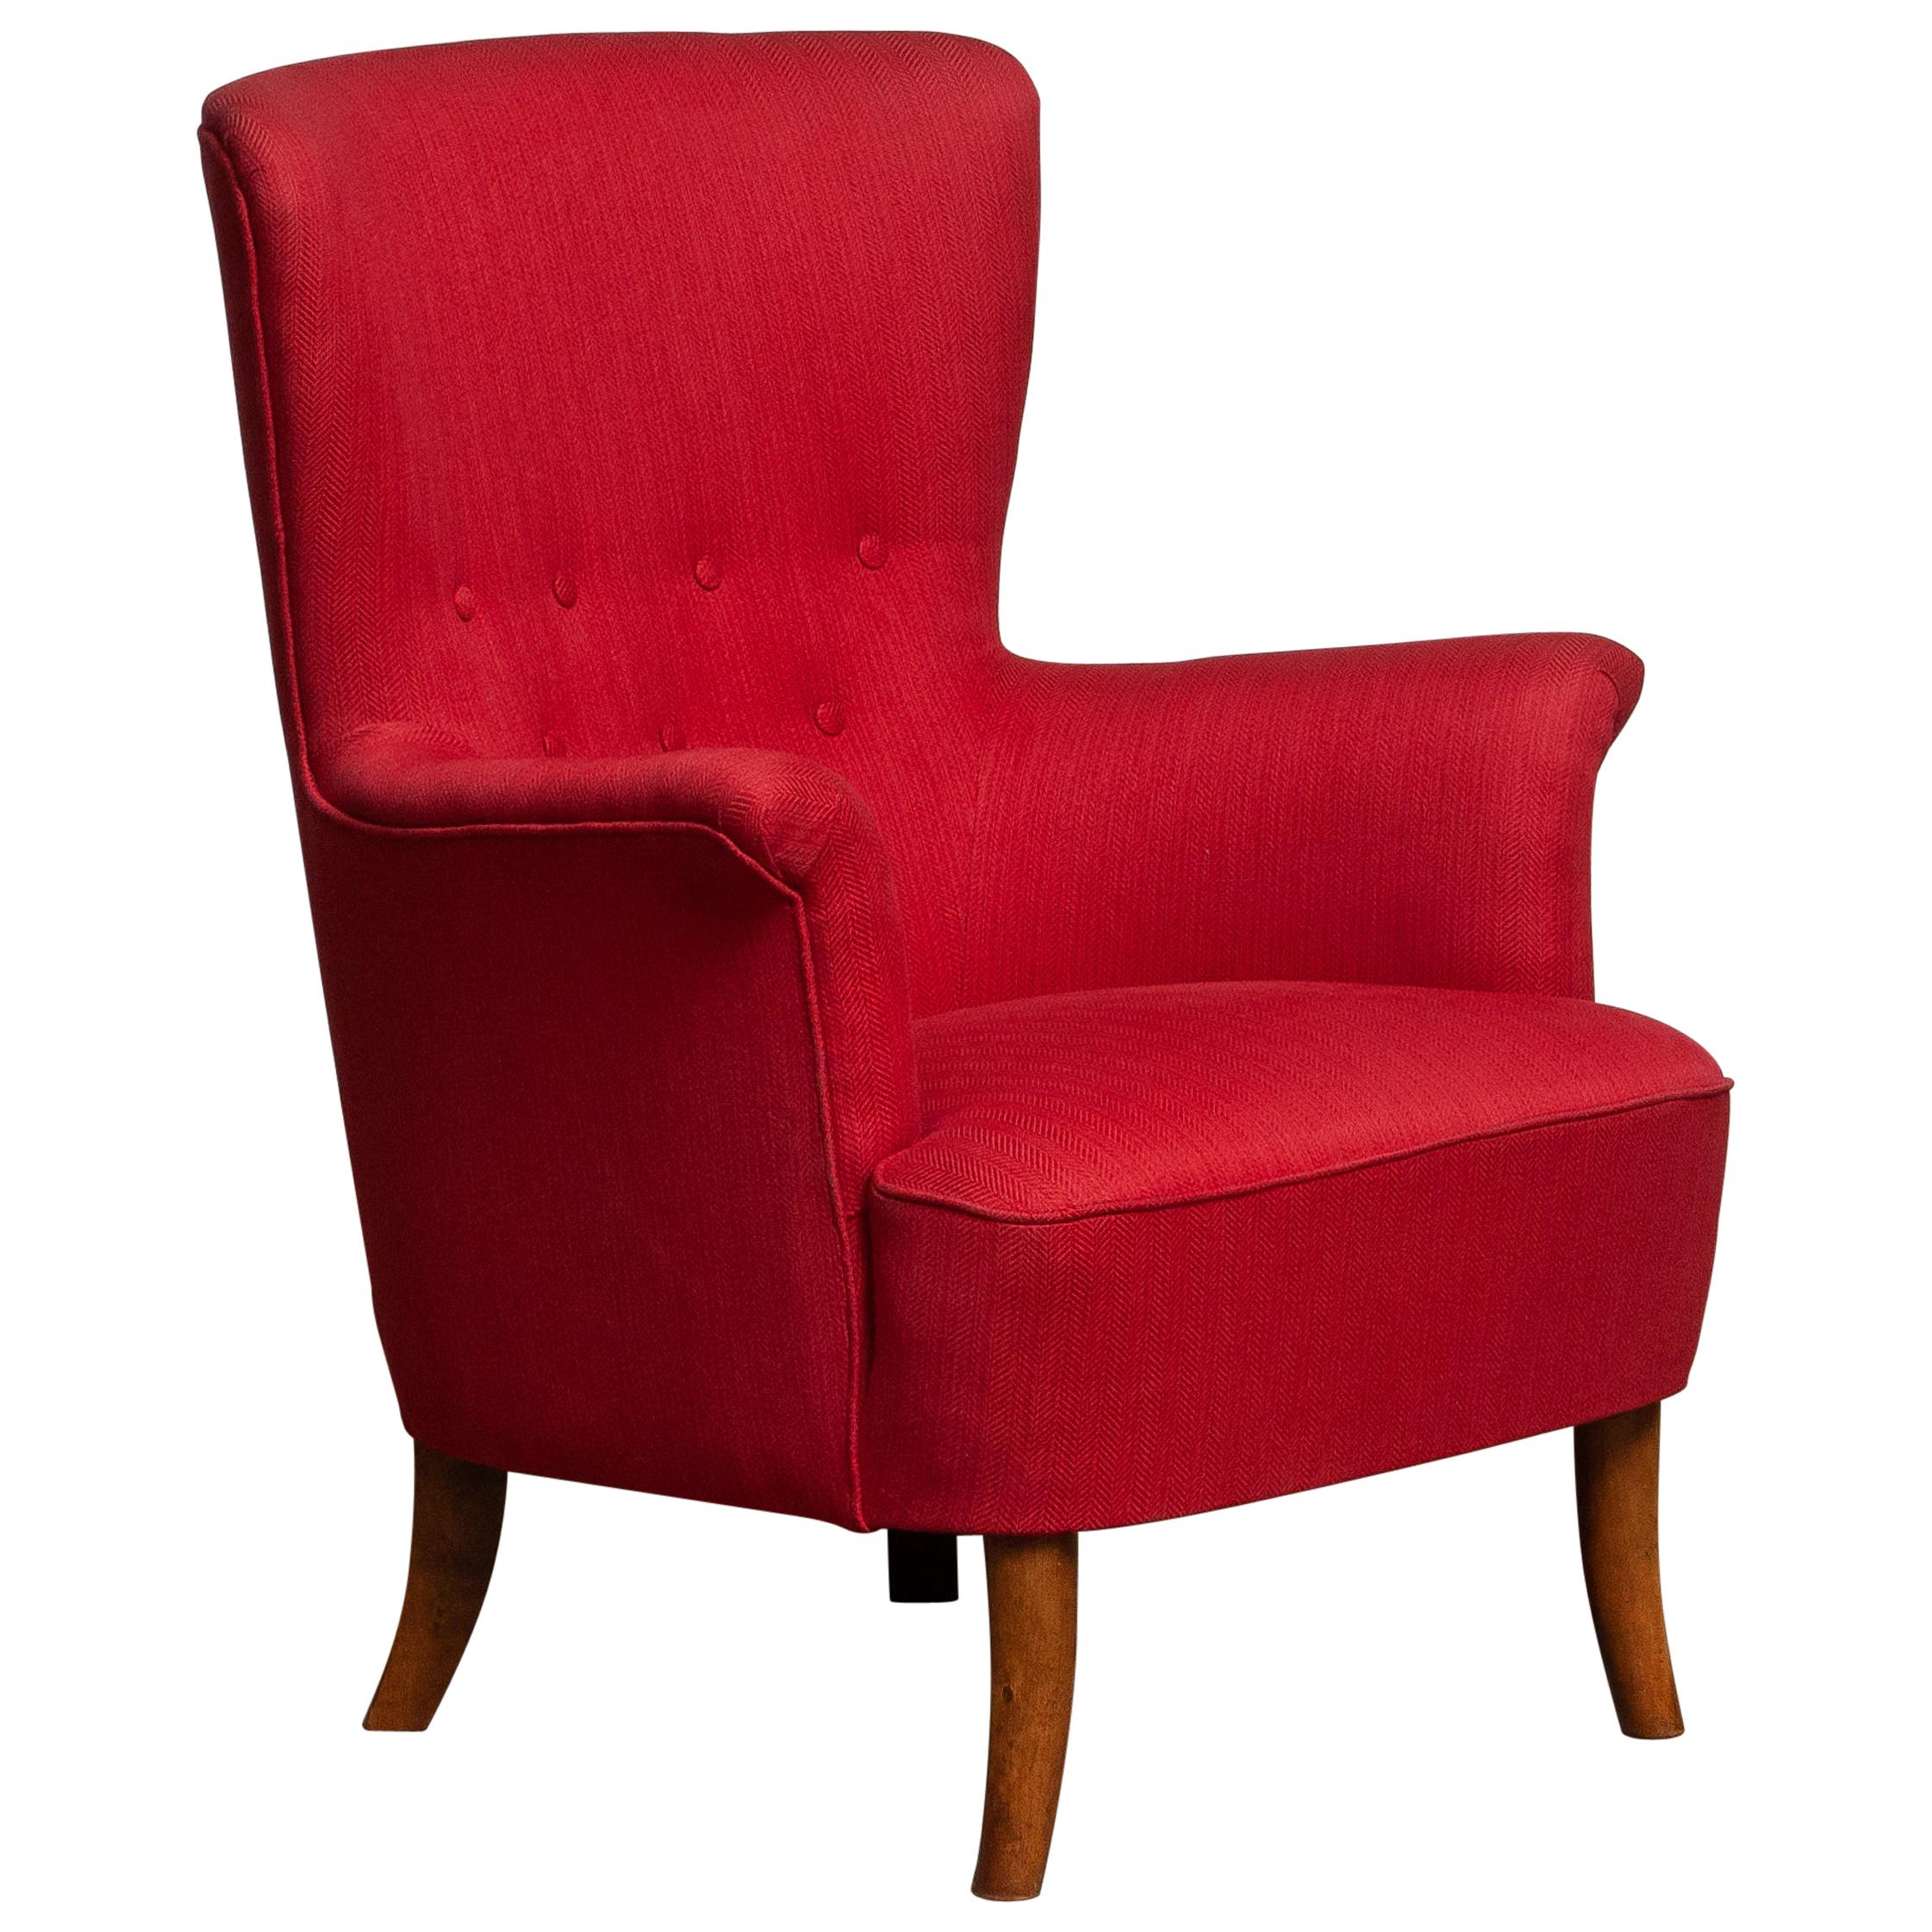 Beautiful fuchsia / red easy / lounge chair designed by Carl Malmsten for OH Sjogren, Sweden.
The overall condition is good
Period: 1940-1949.
 